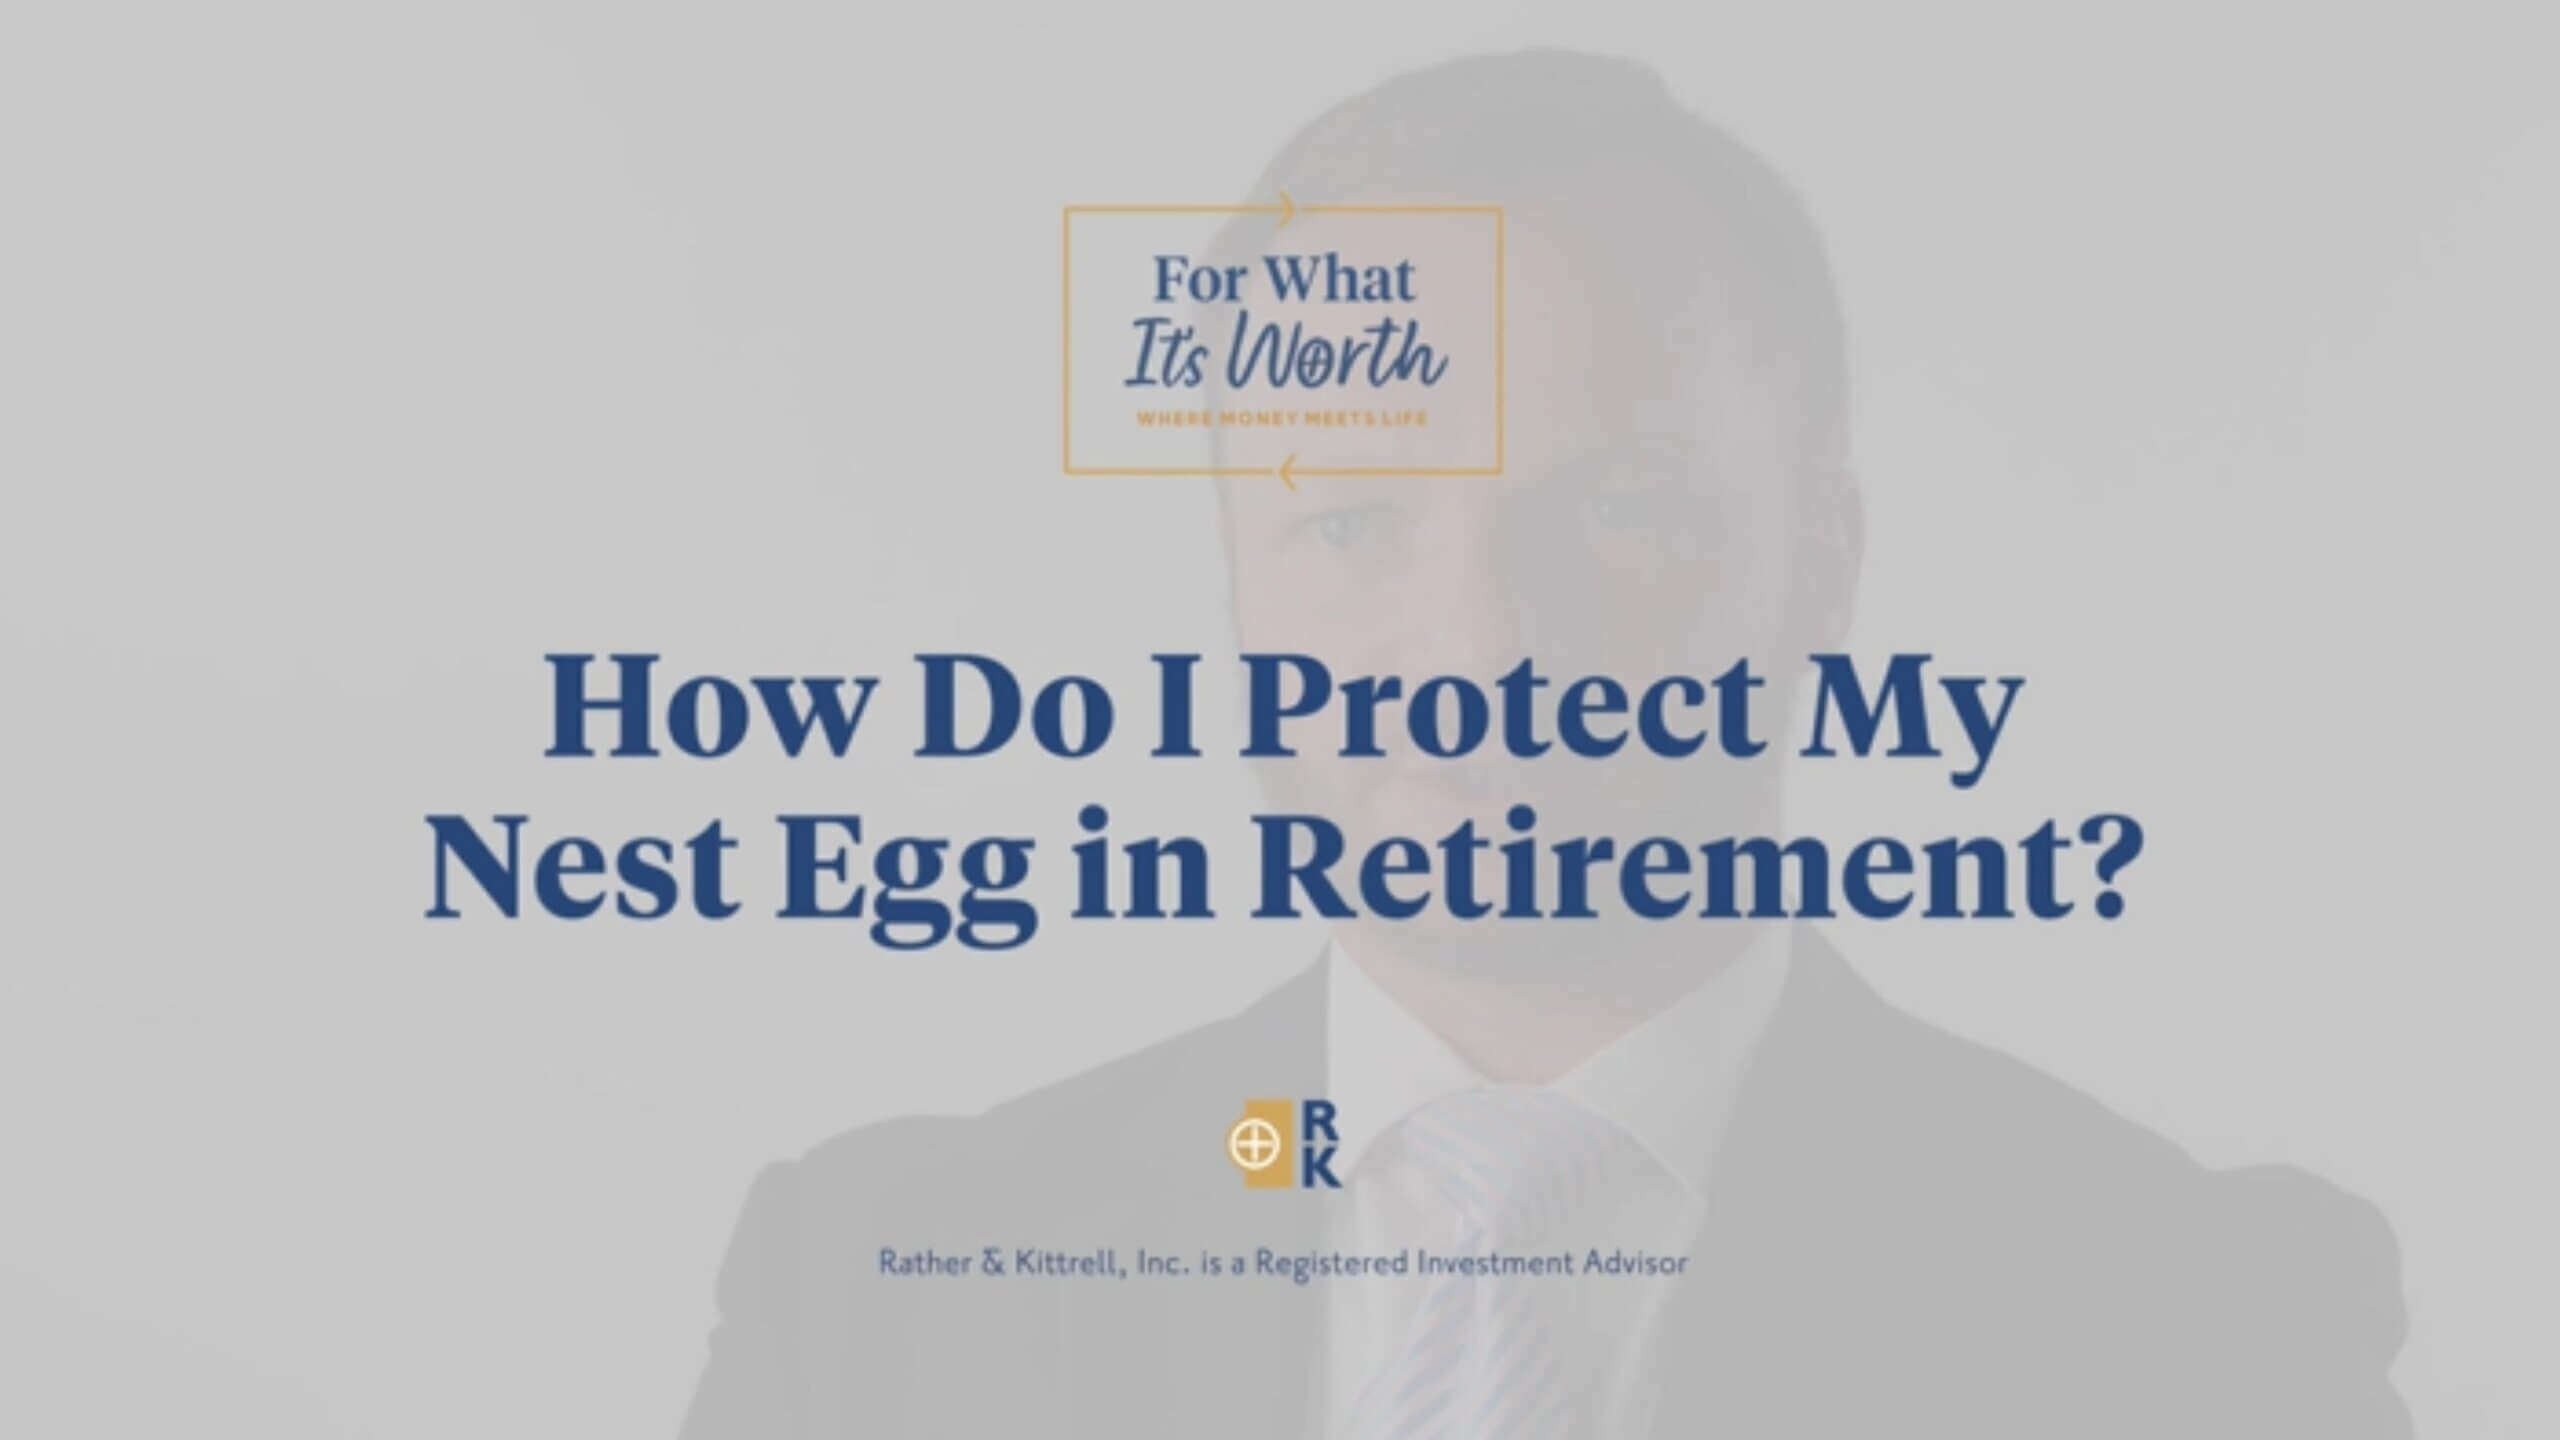 How do I protect my nest egg in retirement?